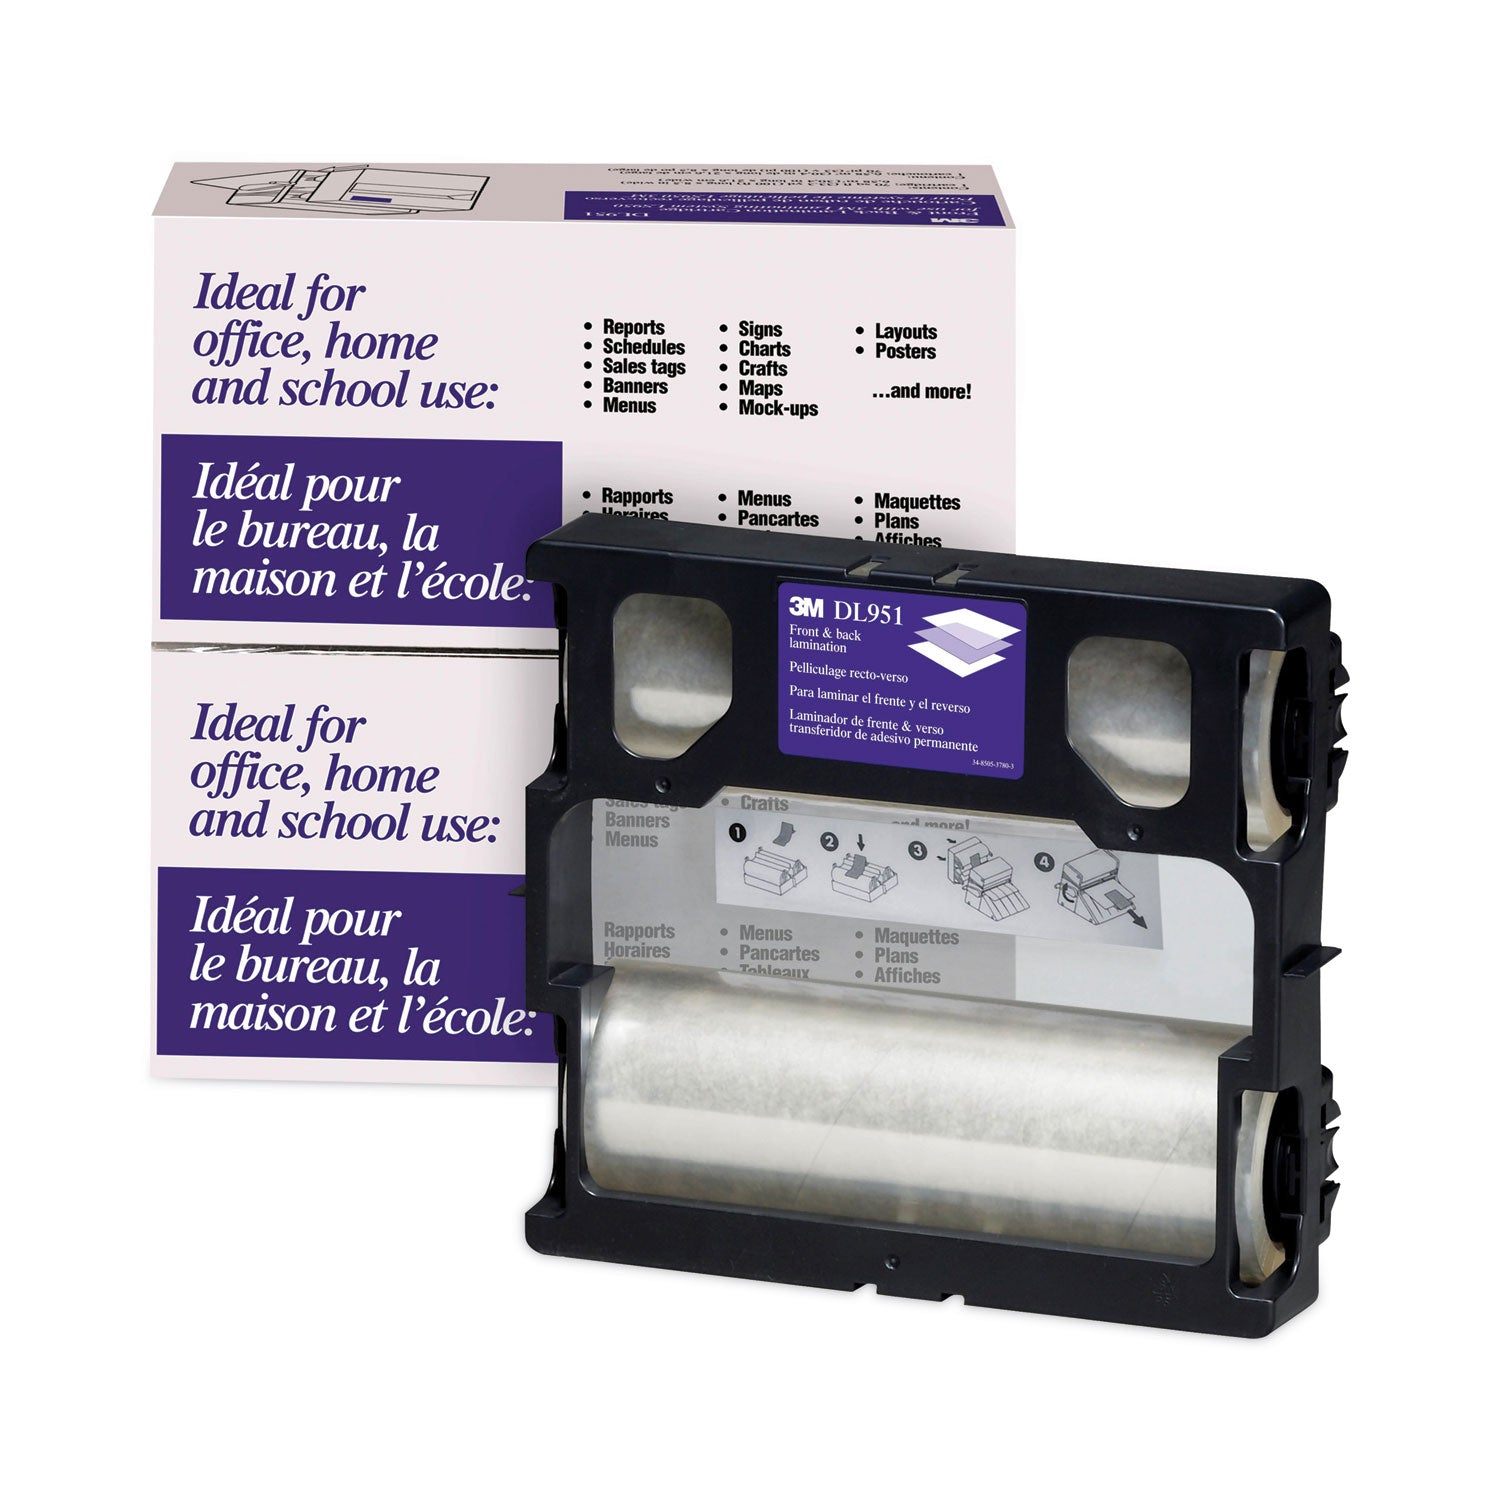 3M/COMMERCIAL TAPE DIV. Refill for LS950 Heat-Free Laminating Machines, 5.6 mil, 8.5"" x 100 ft, Gloss Clear